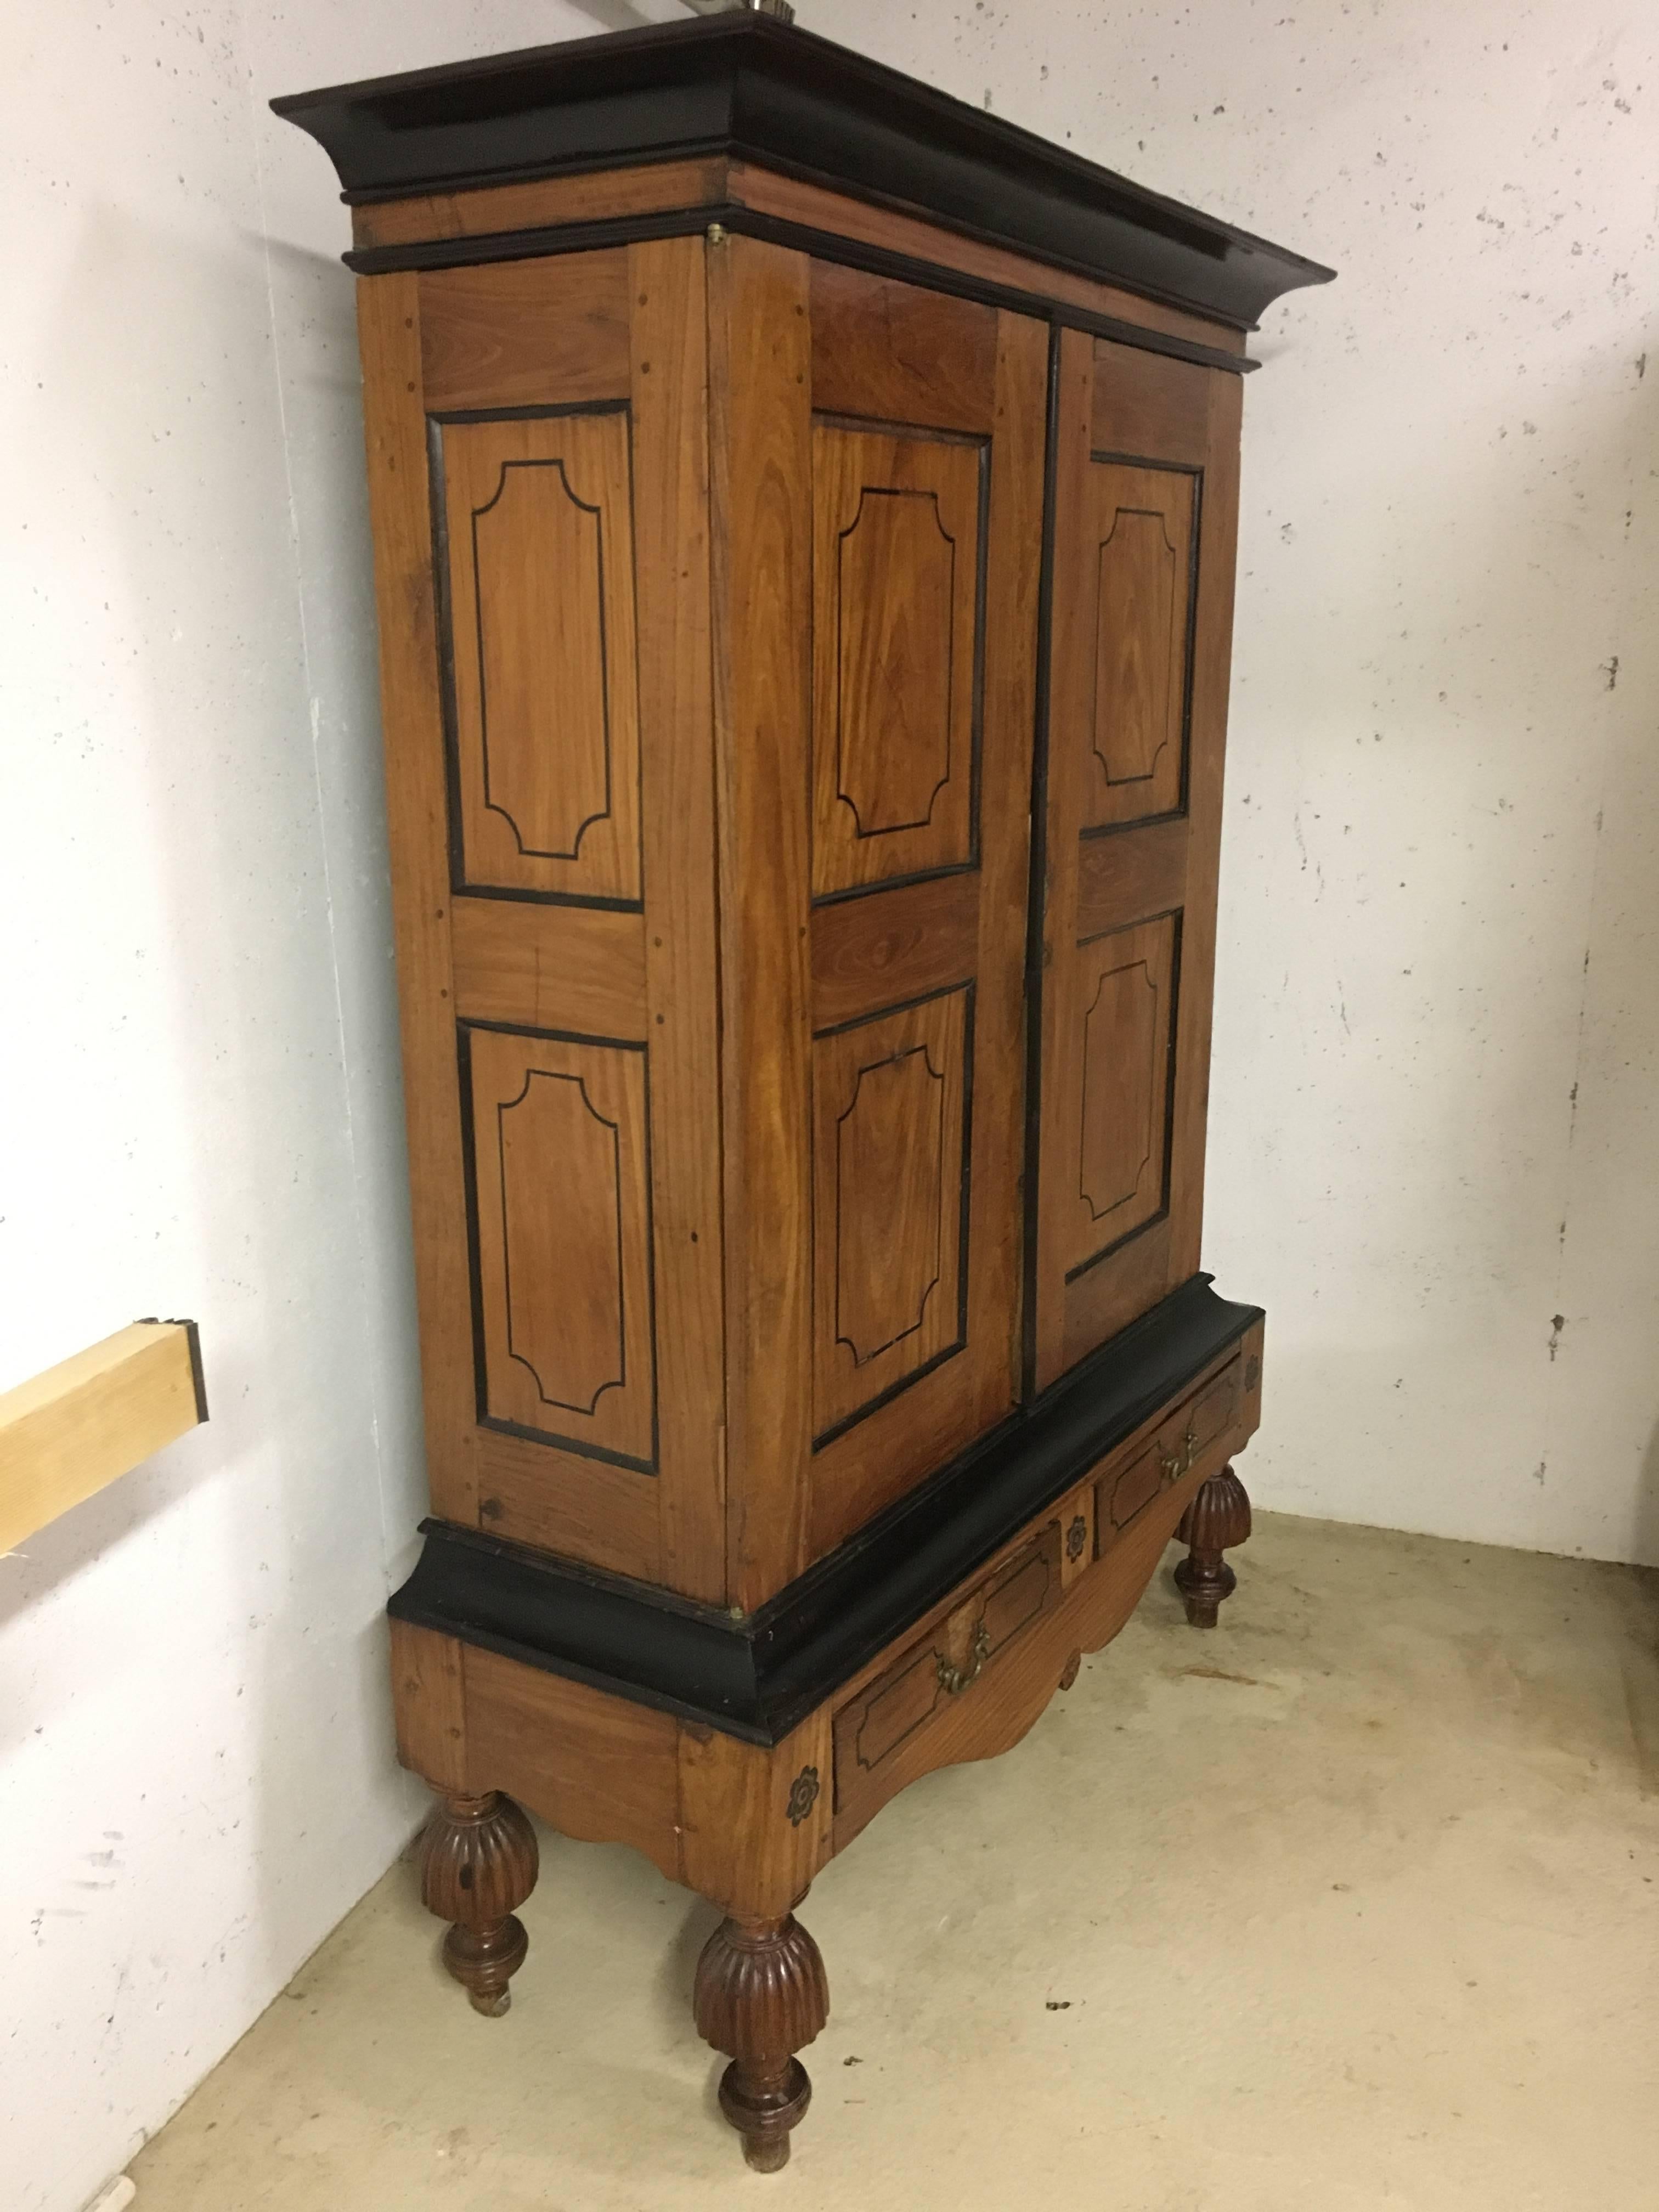 Early 19th century English Colonial satinwood and ebony linen press. Cabinet is composed of solid Satinwood with solid ebony trim and inlay.
Handmade in Sri Lanka, where both satinwood and ebony are indigenous, the cabinet was made with no nails,